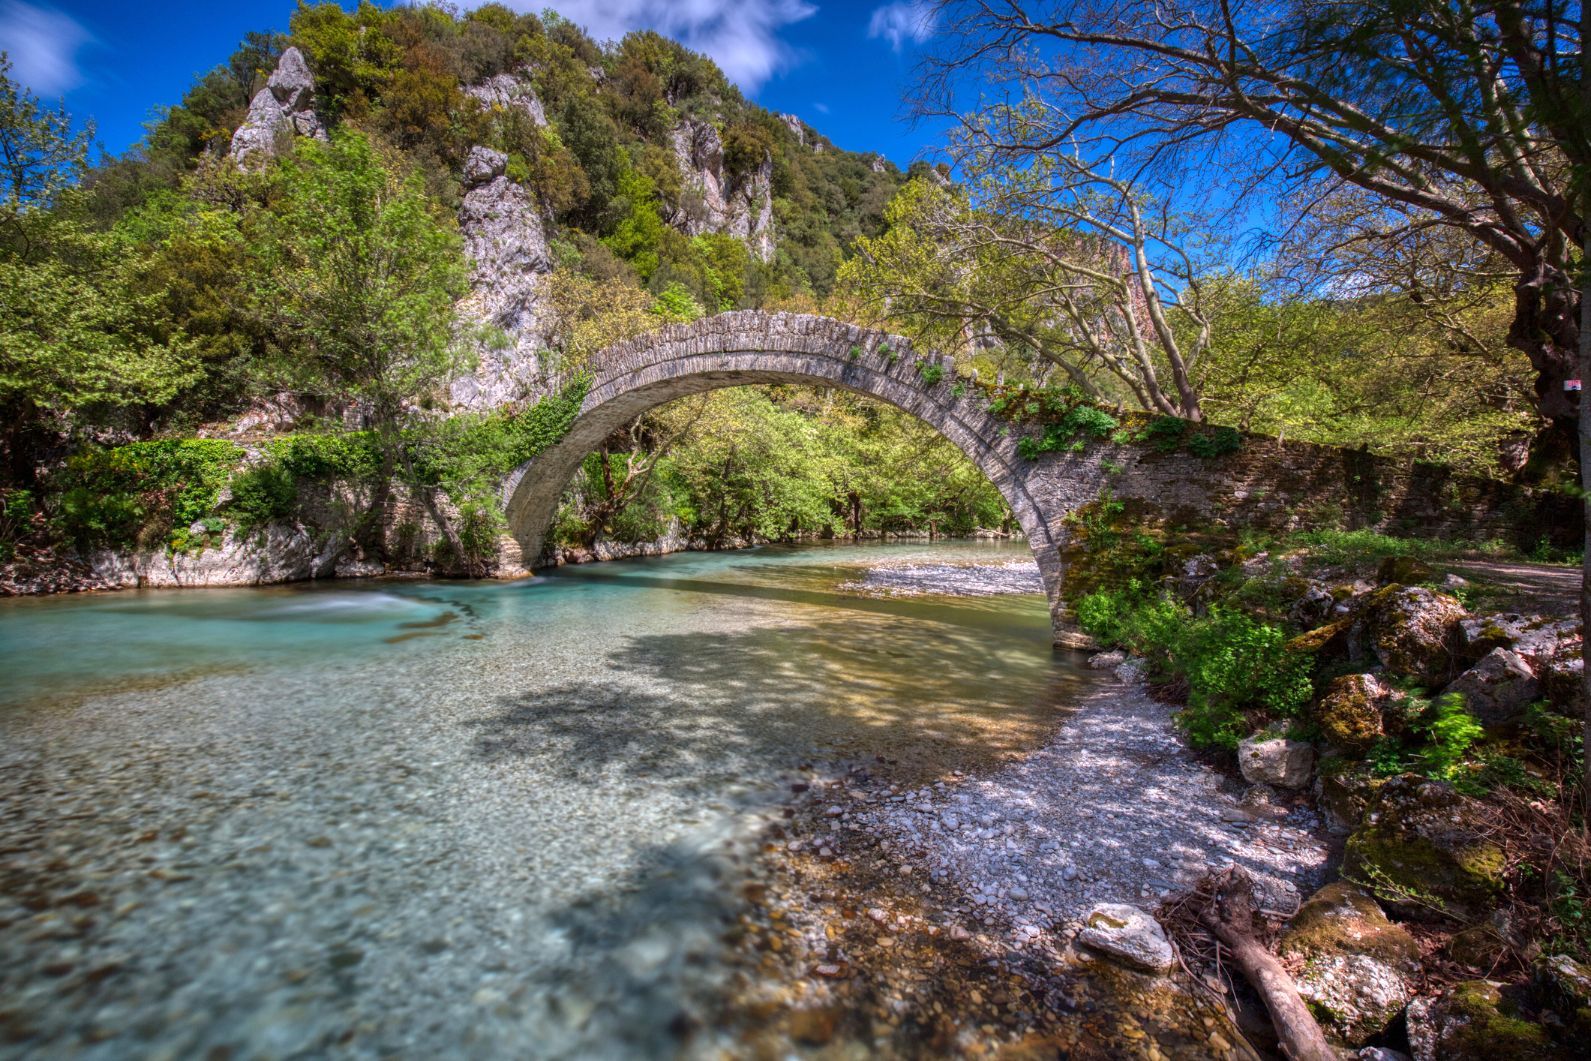 The Aoös River, in Greece, flowing under a small stone bridge.